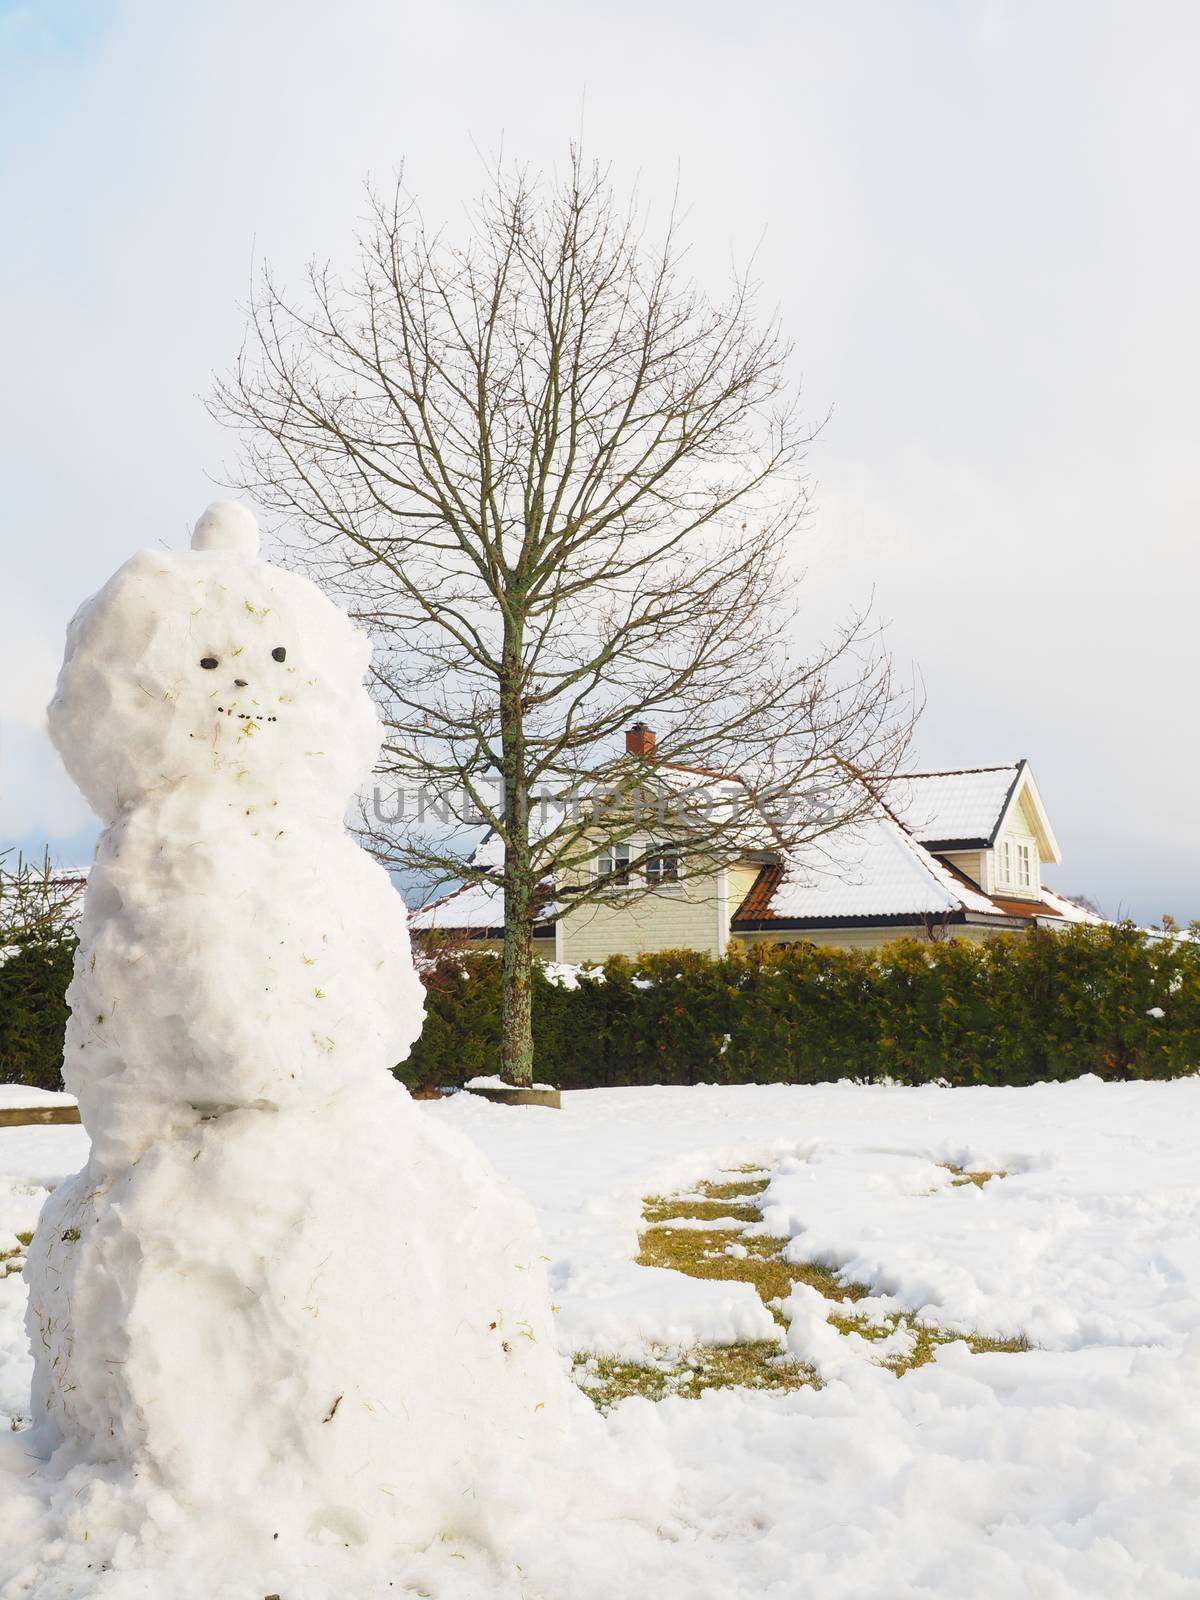 Snowman in garden half done, without scarf, hat and carrot in front of house and oak tree